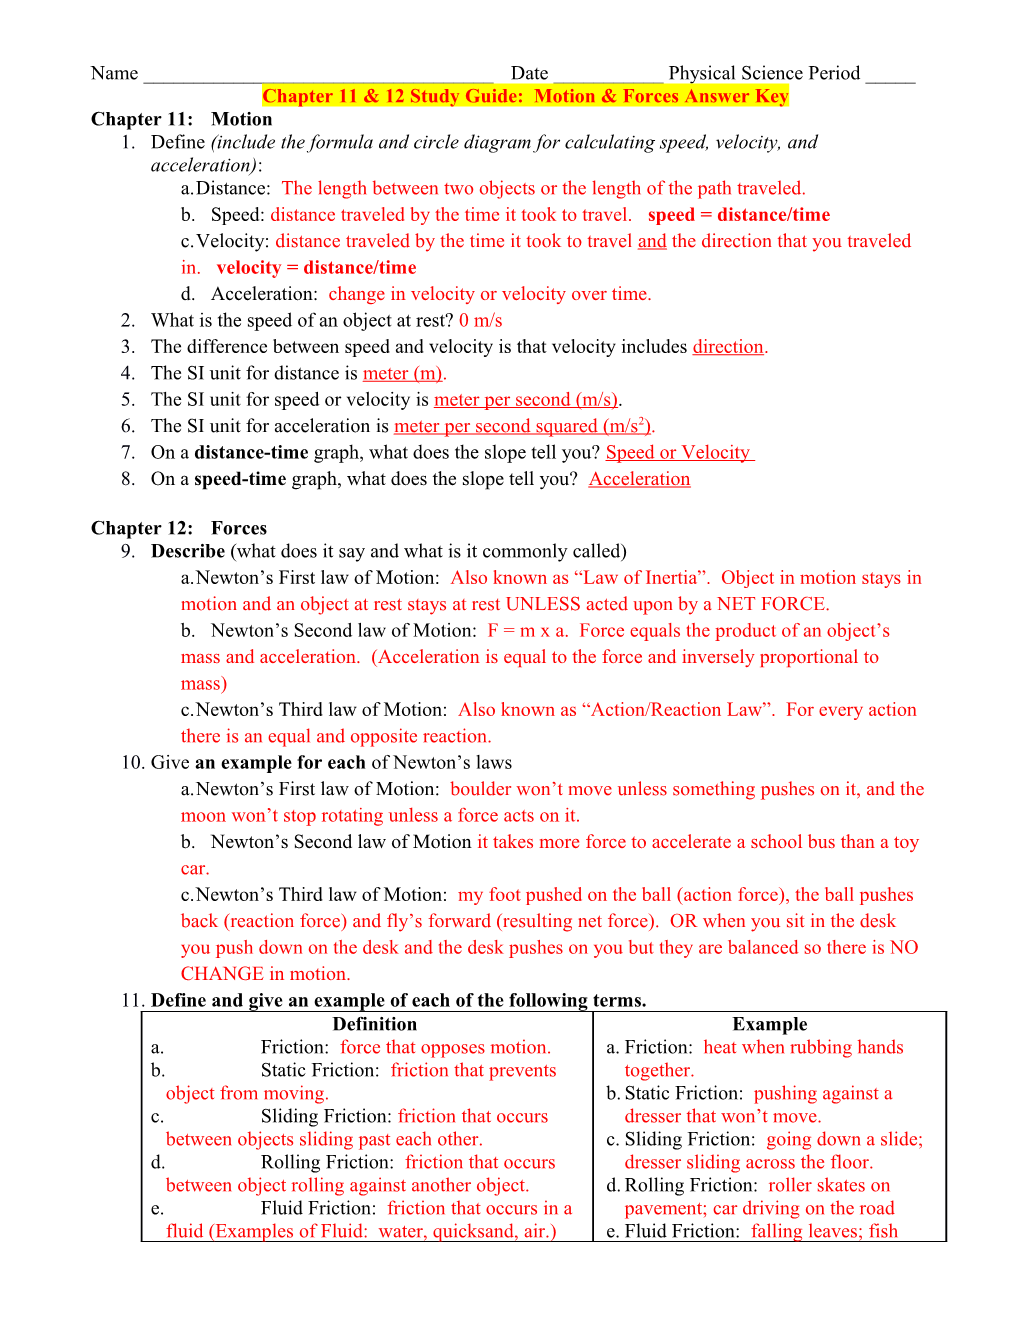 Chapter 11 & 12 Study Guide: Motion & Forces